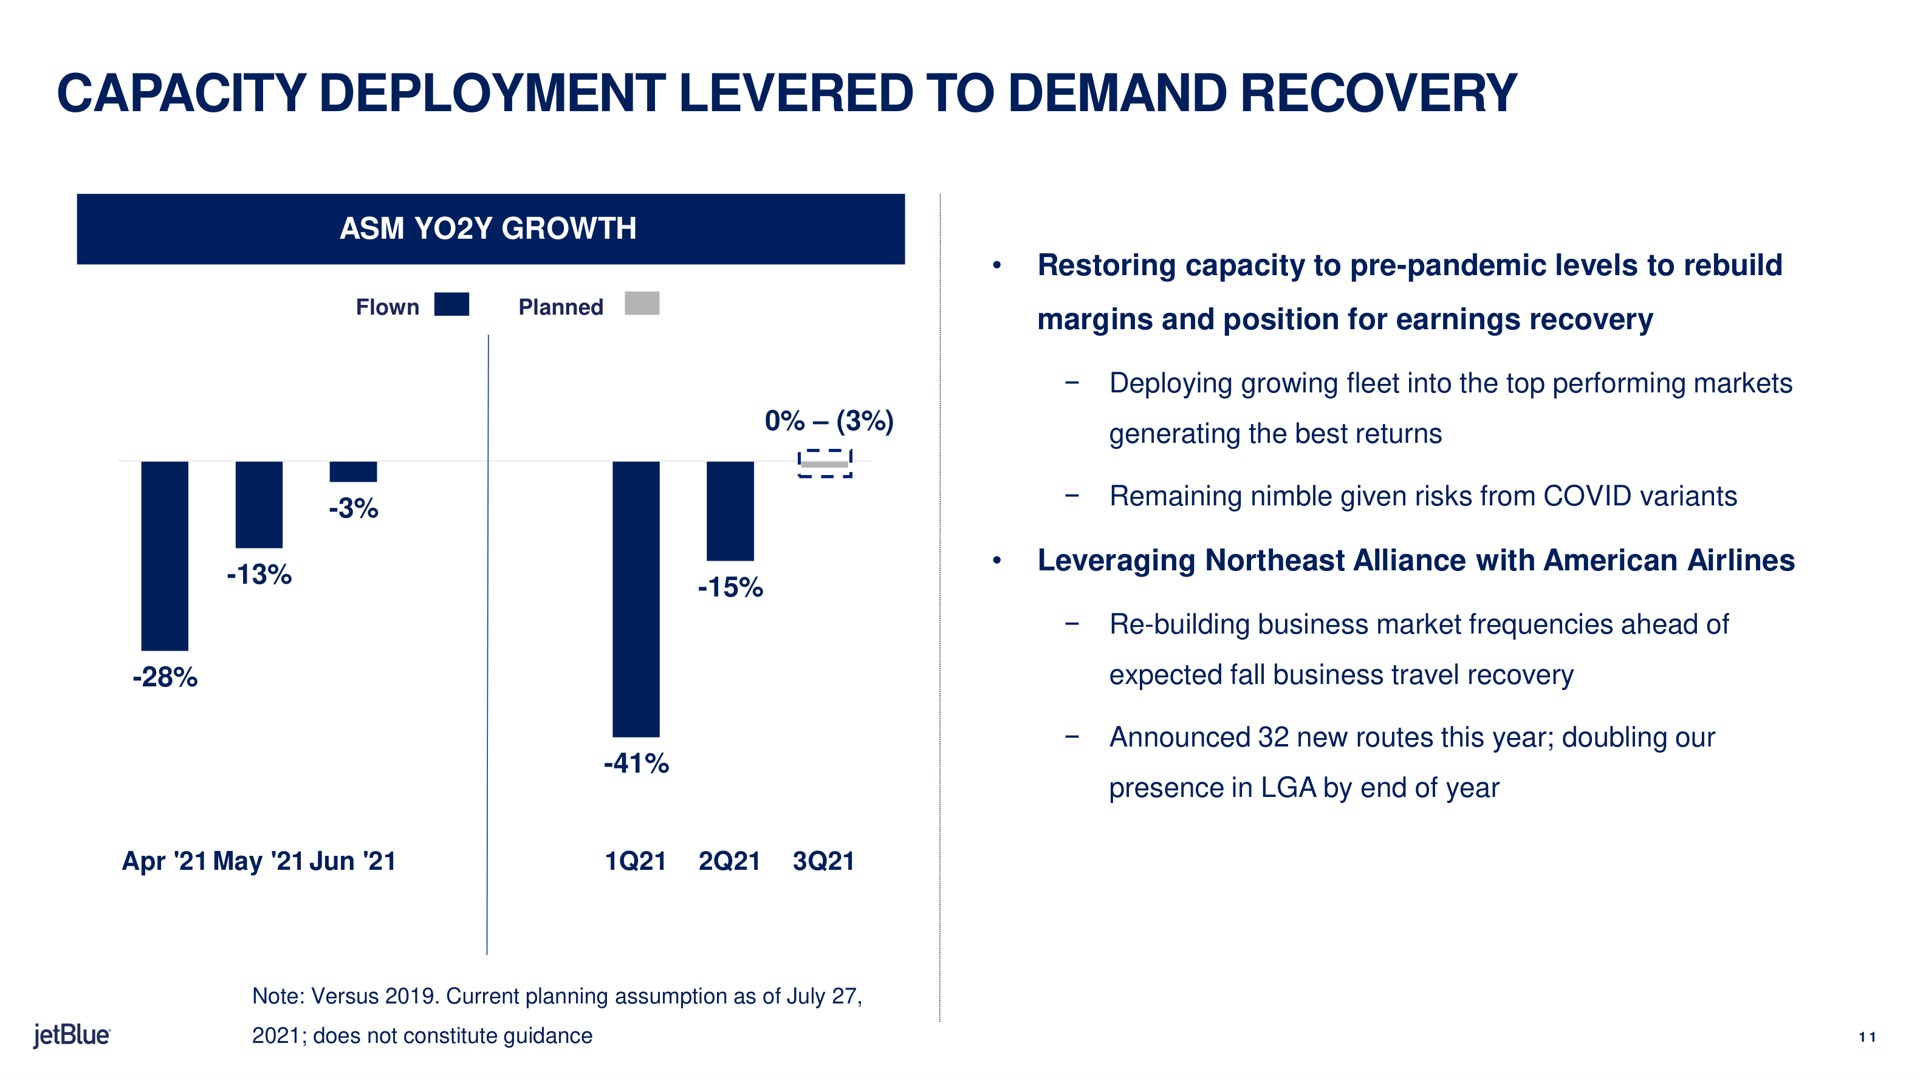 capacity deployment levered to demand recovery flown planned margins and position for earnings | jetBlue